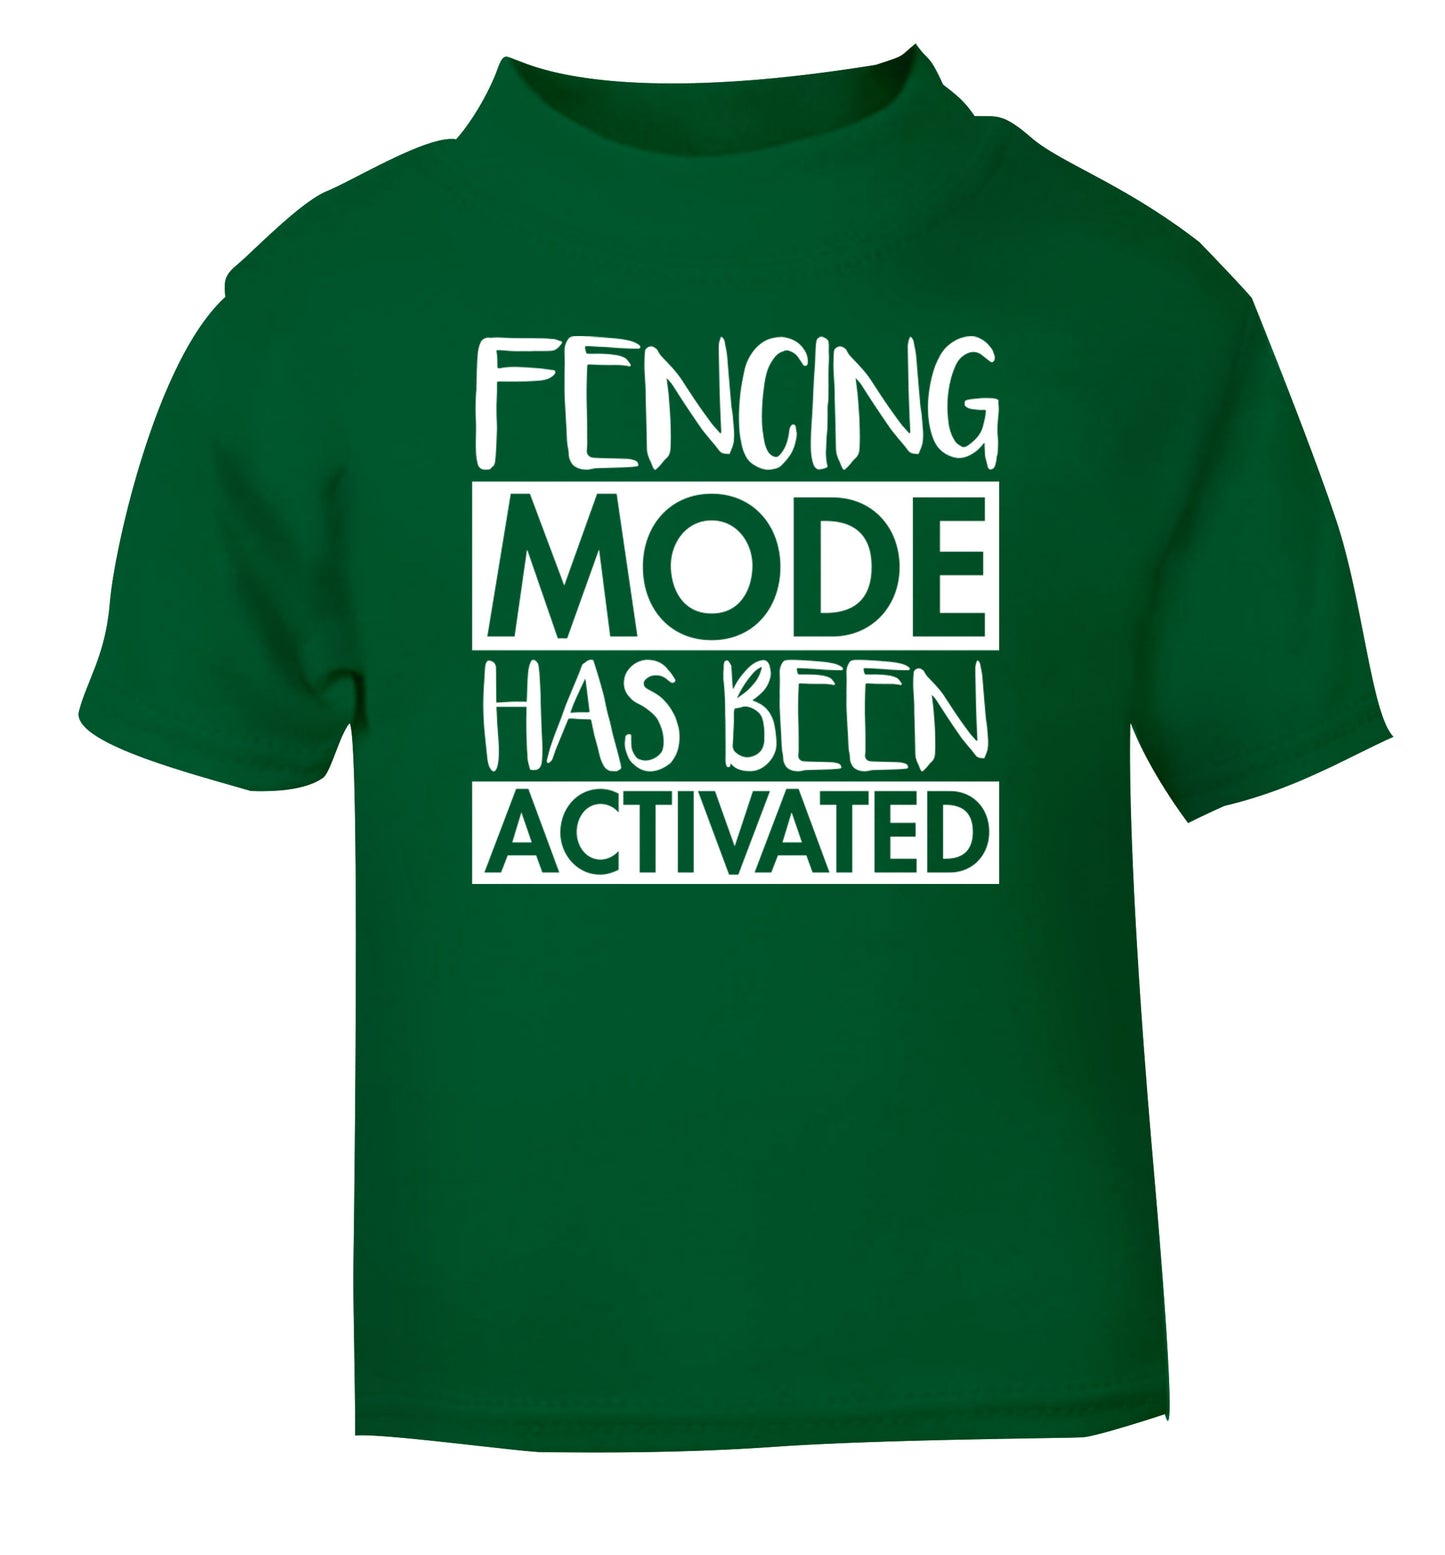 Fencing mode activated green Baby Toddler Tshirt 2 Years